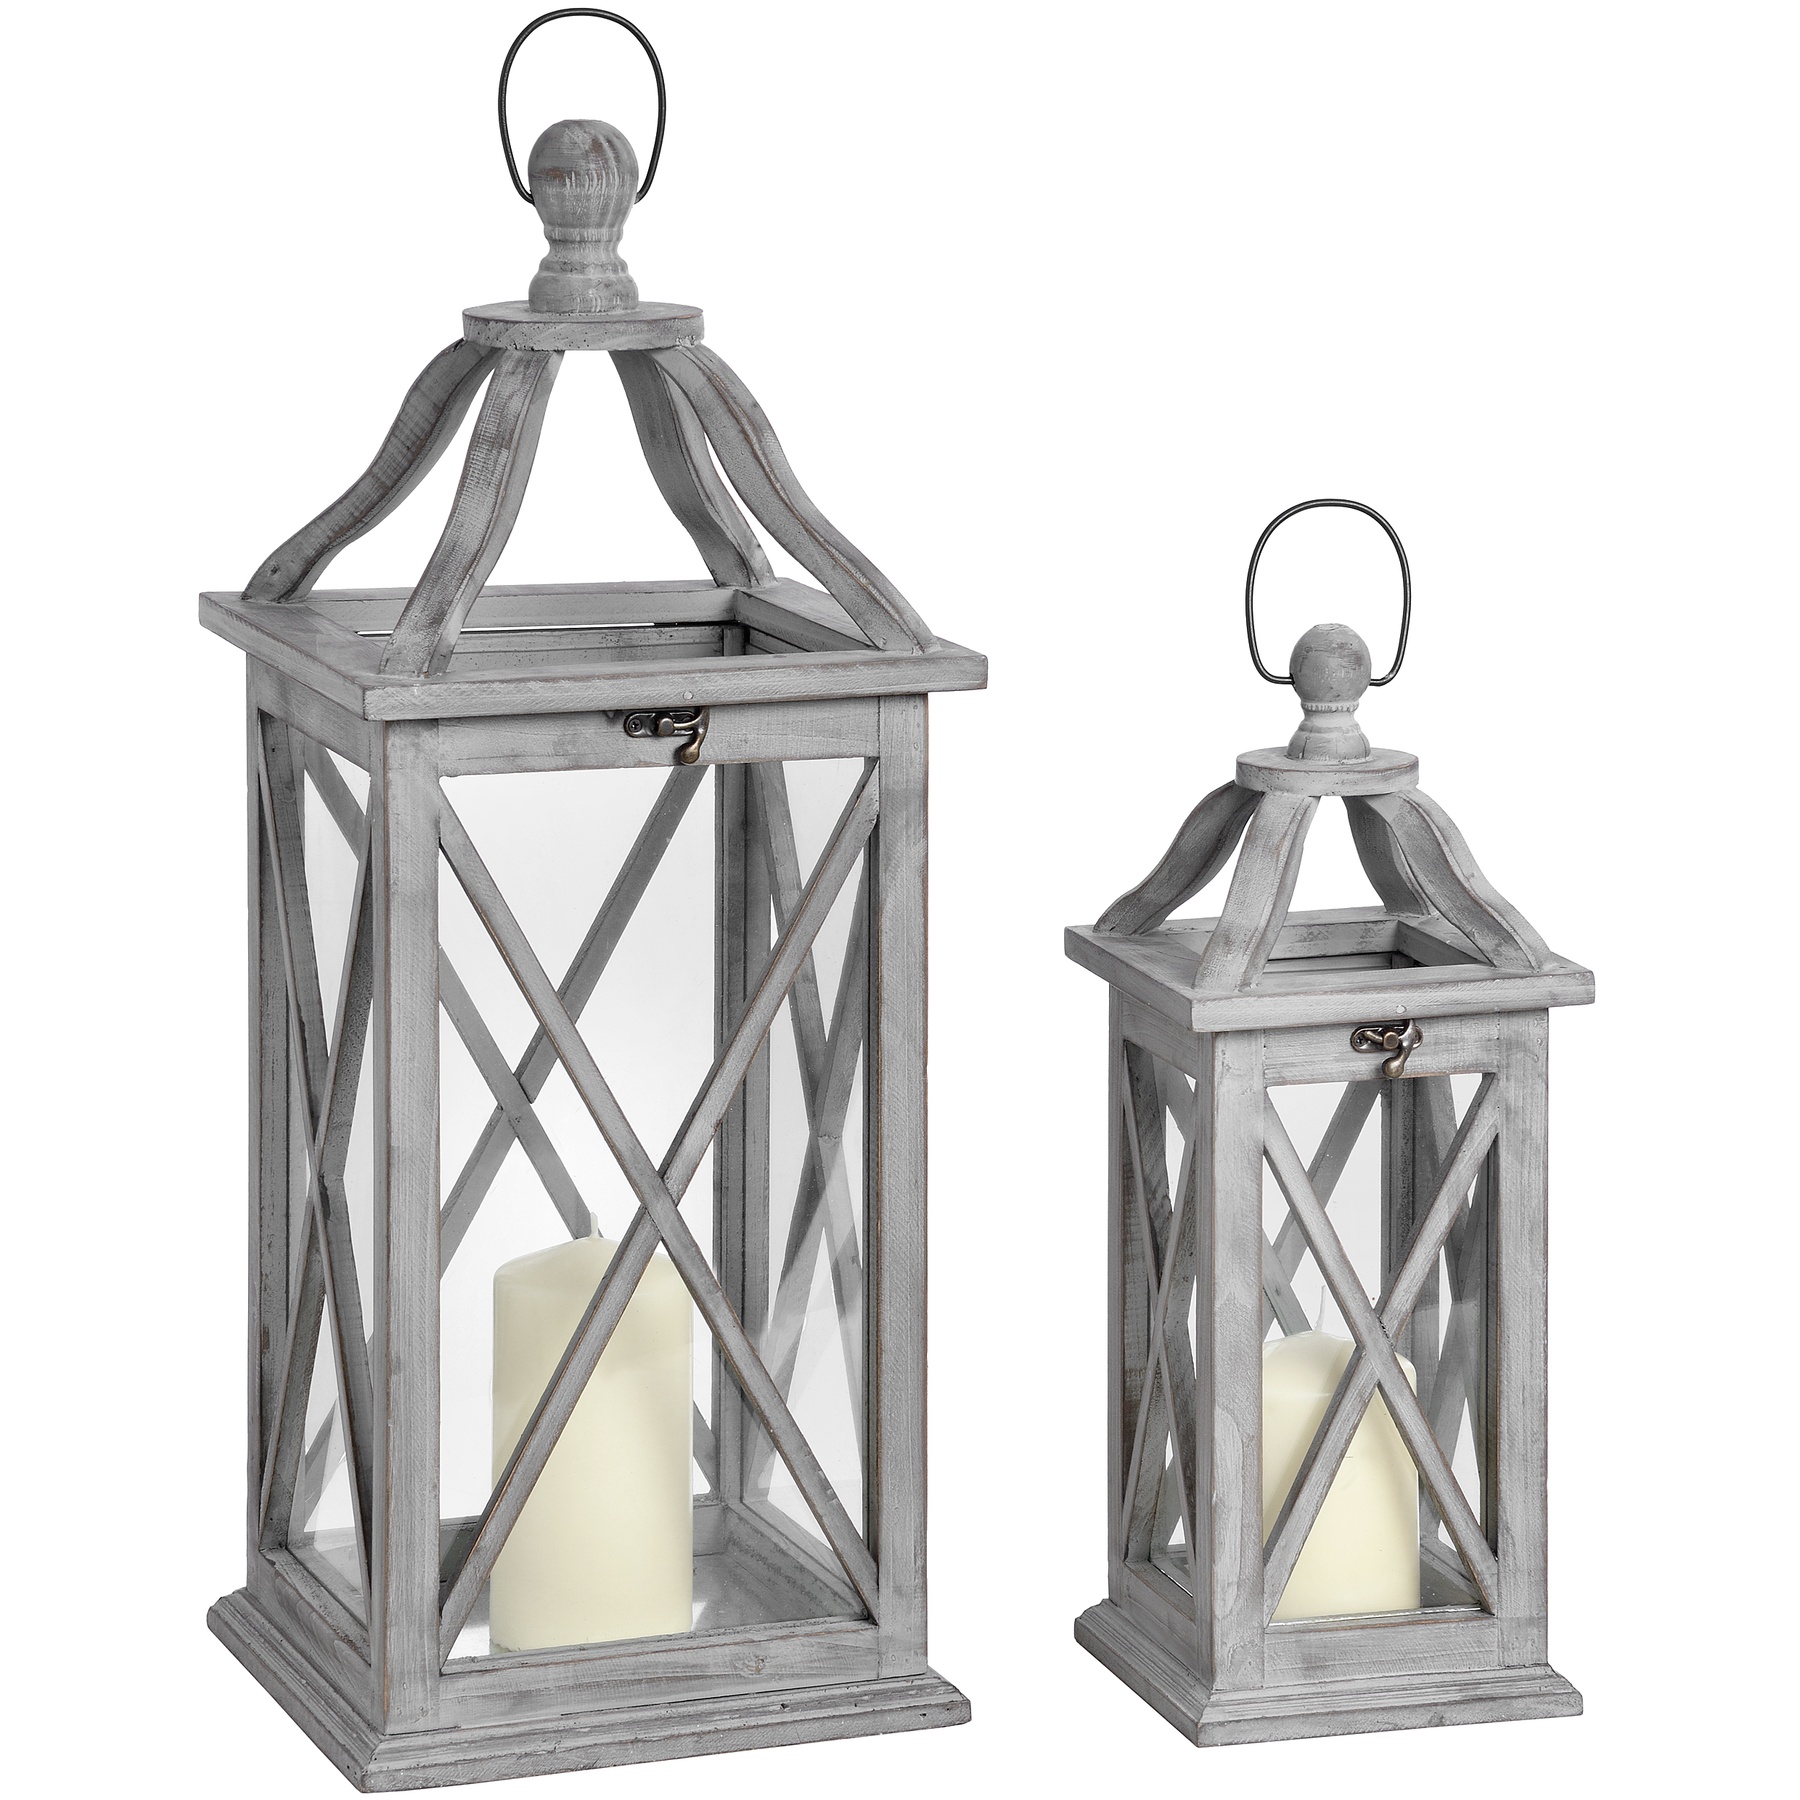 Set Of Two Grey Cross Section Lanterns With Open Tops - Image 1